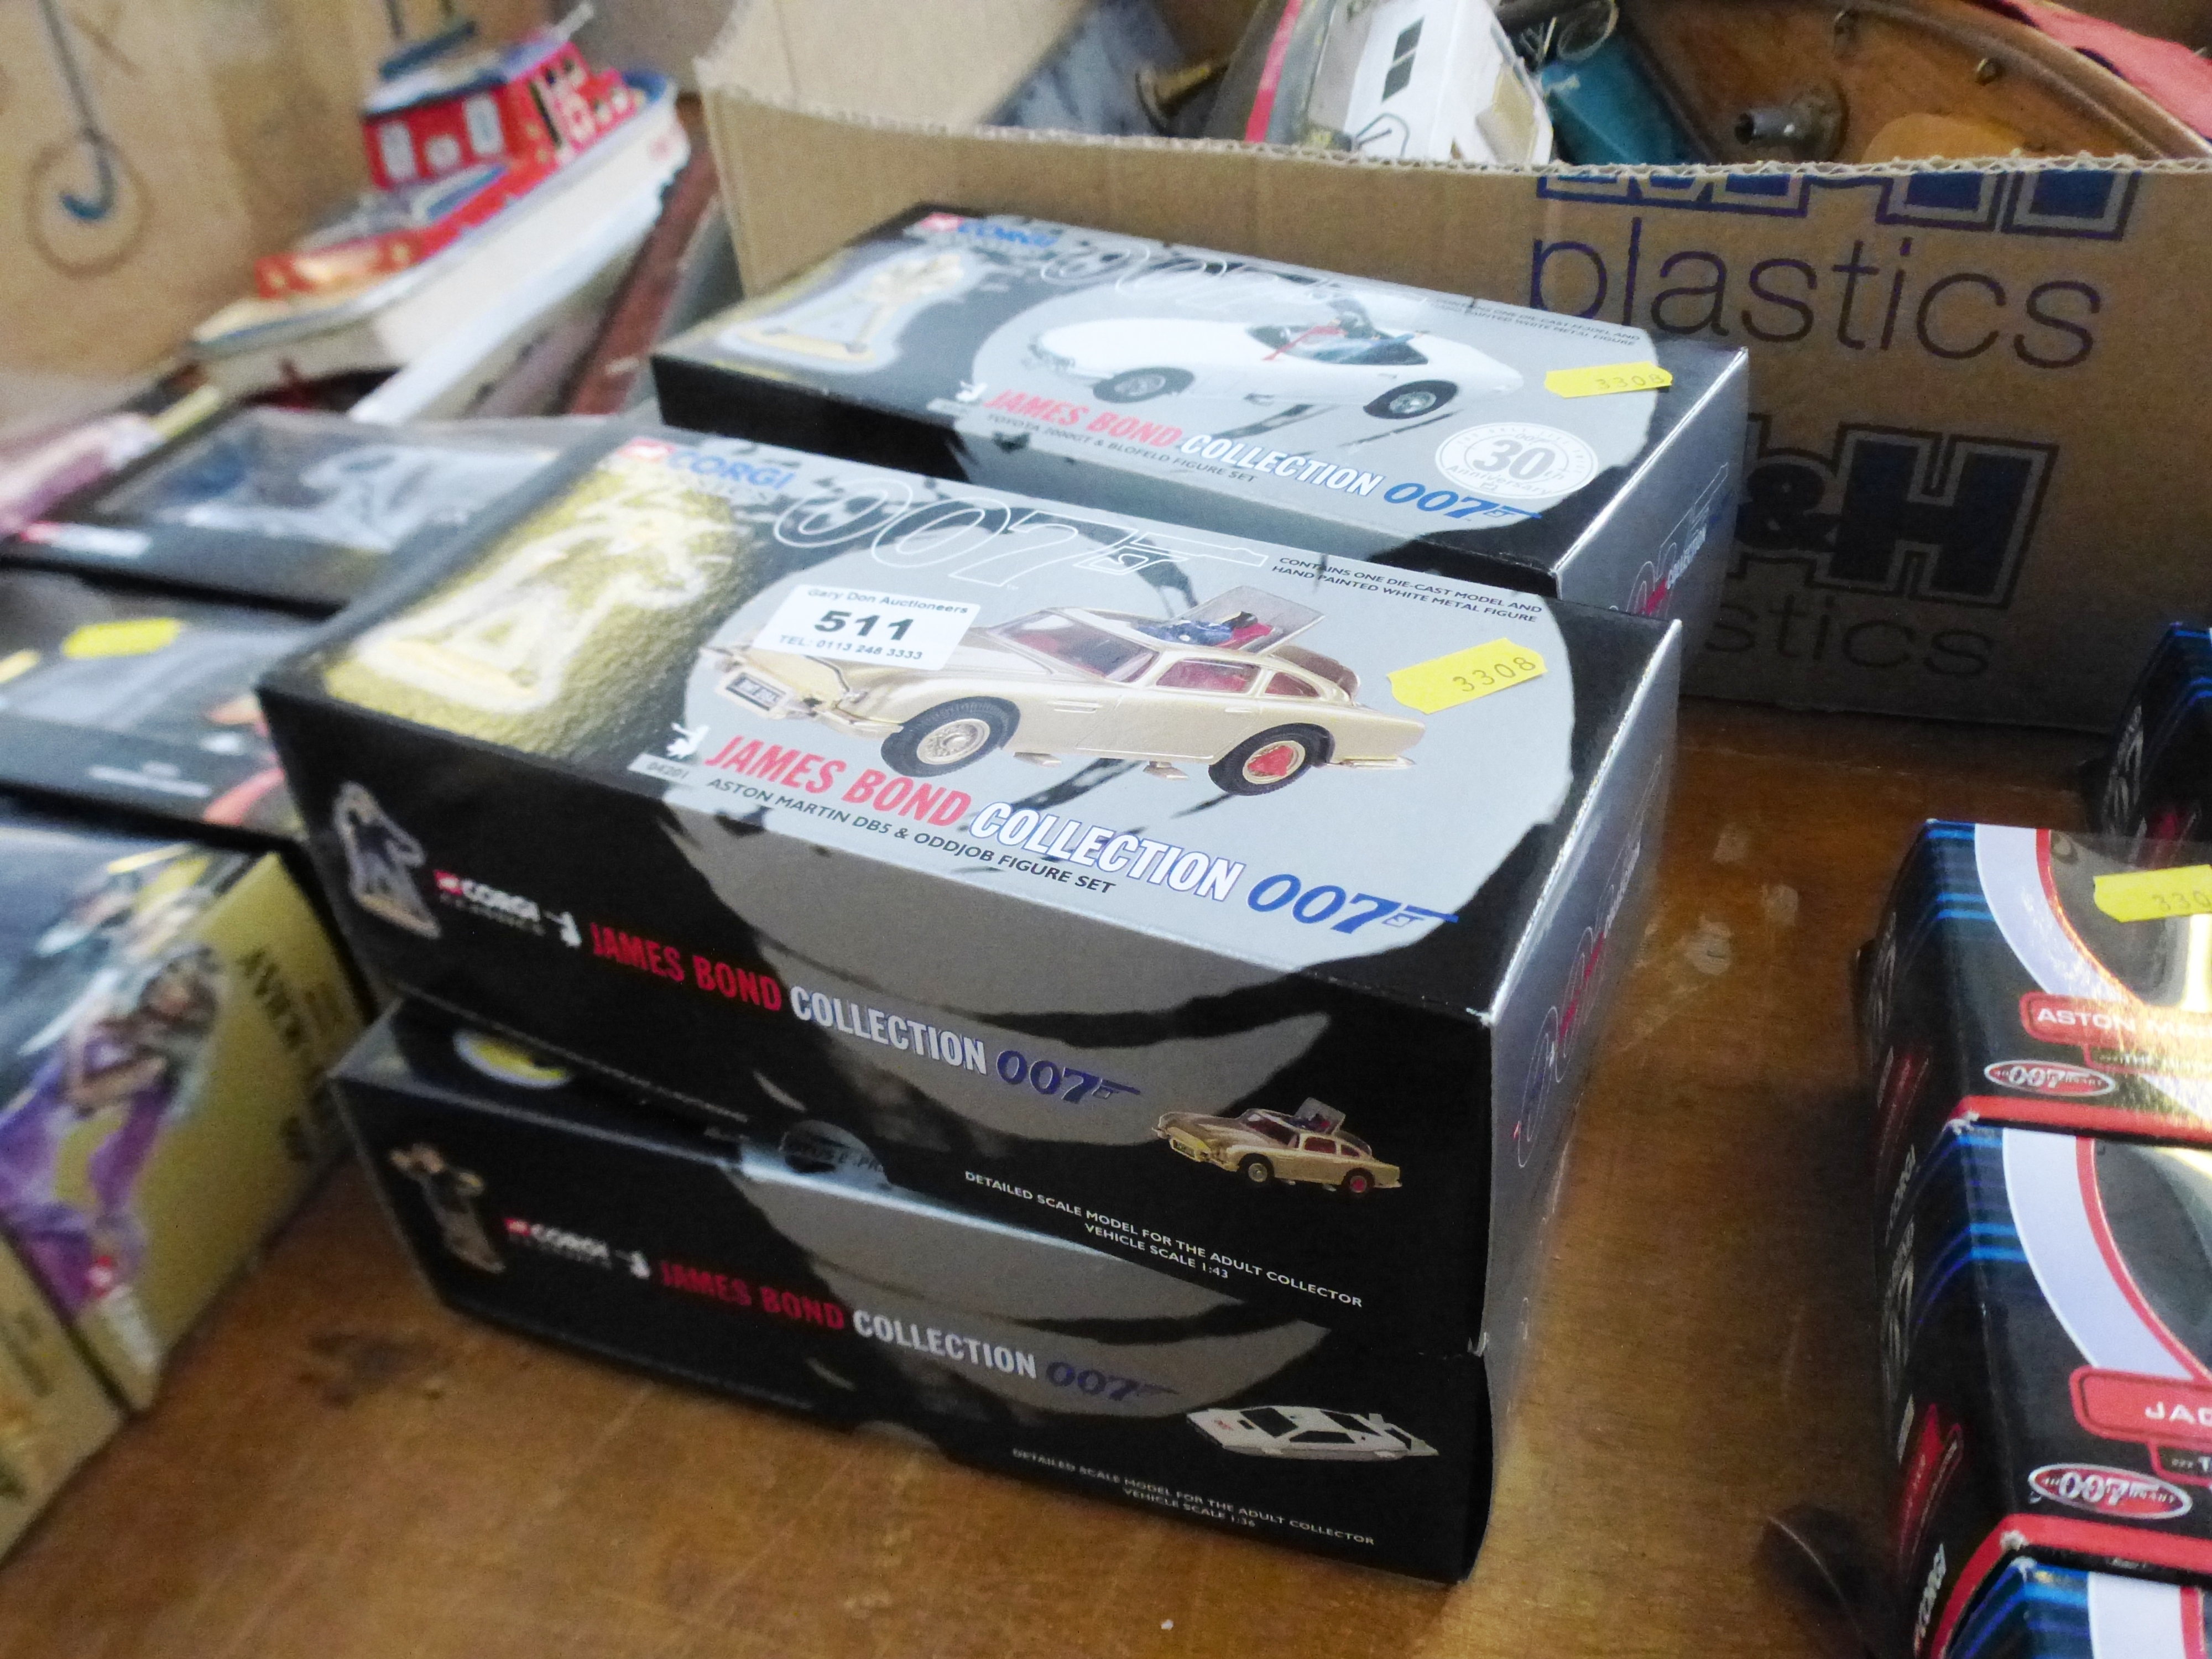 4 BOXED JAMES BOND COLLECTION SETS - 04201, 65101, 65001 AND 65301